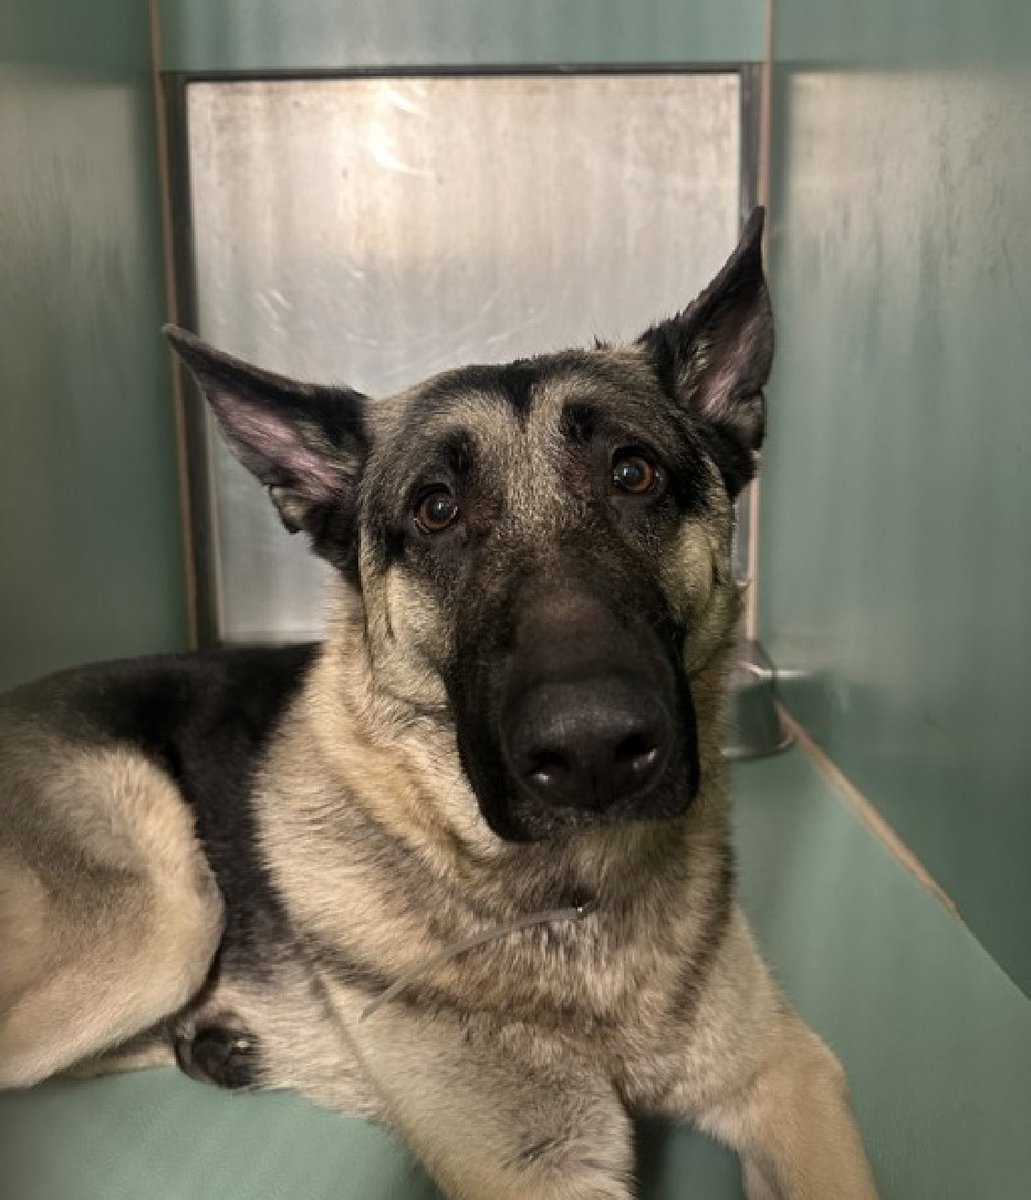 Wrenched from his home because his owner was arrested, Storm 198595 arrived April 25 and is now struggling with his loss. Pacing, spinning and whining in his kennel, this handsome 3 year old is anxious and TBK Saturday in NYCACC. A dog who's in distress and in need of help before